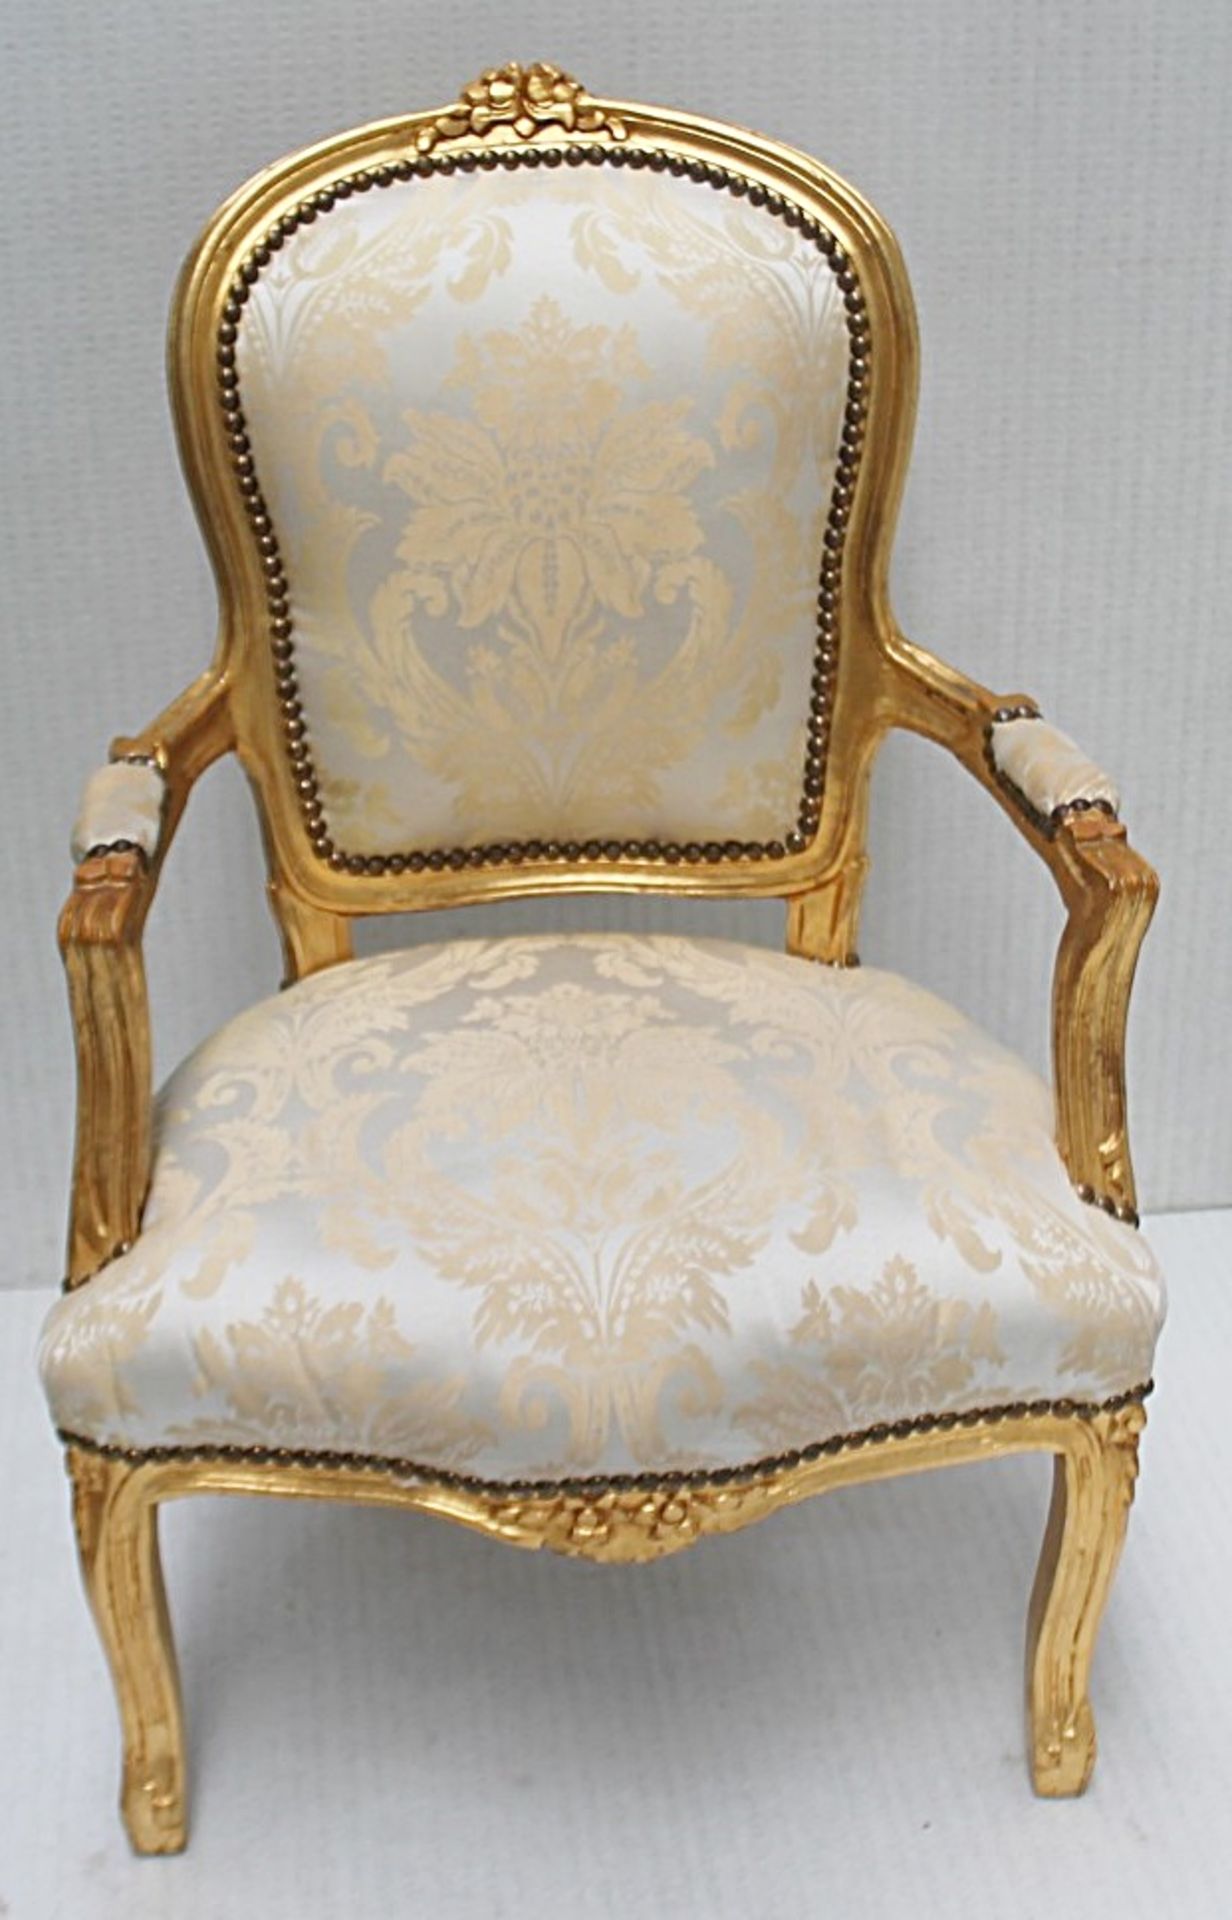 1 x Regency-Style Upholstered Chair In Gold & Silver With Ornate Carved Detailing - Recently Removed